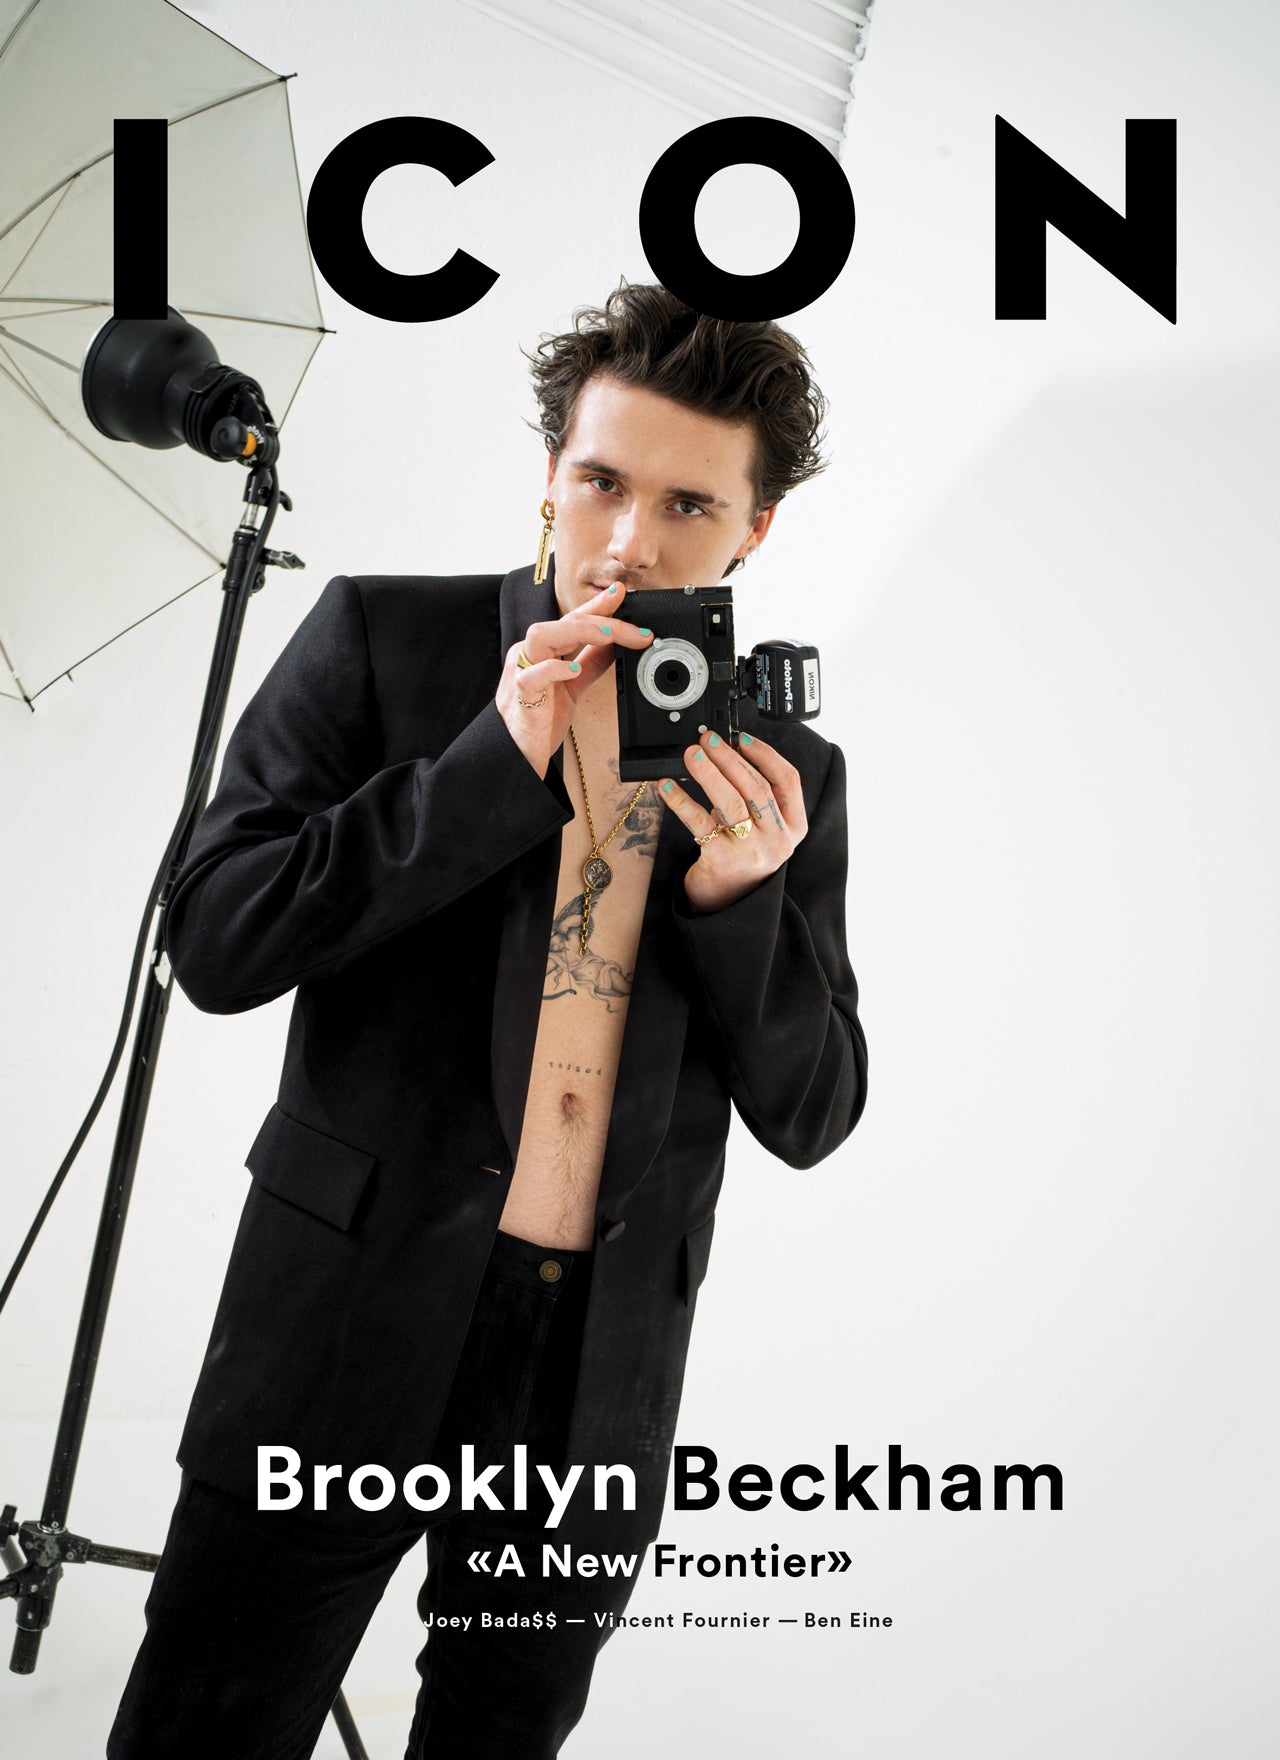 ICON 04 Magazine - A New Frontier - Brooklyn Beckham